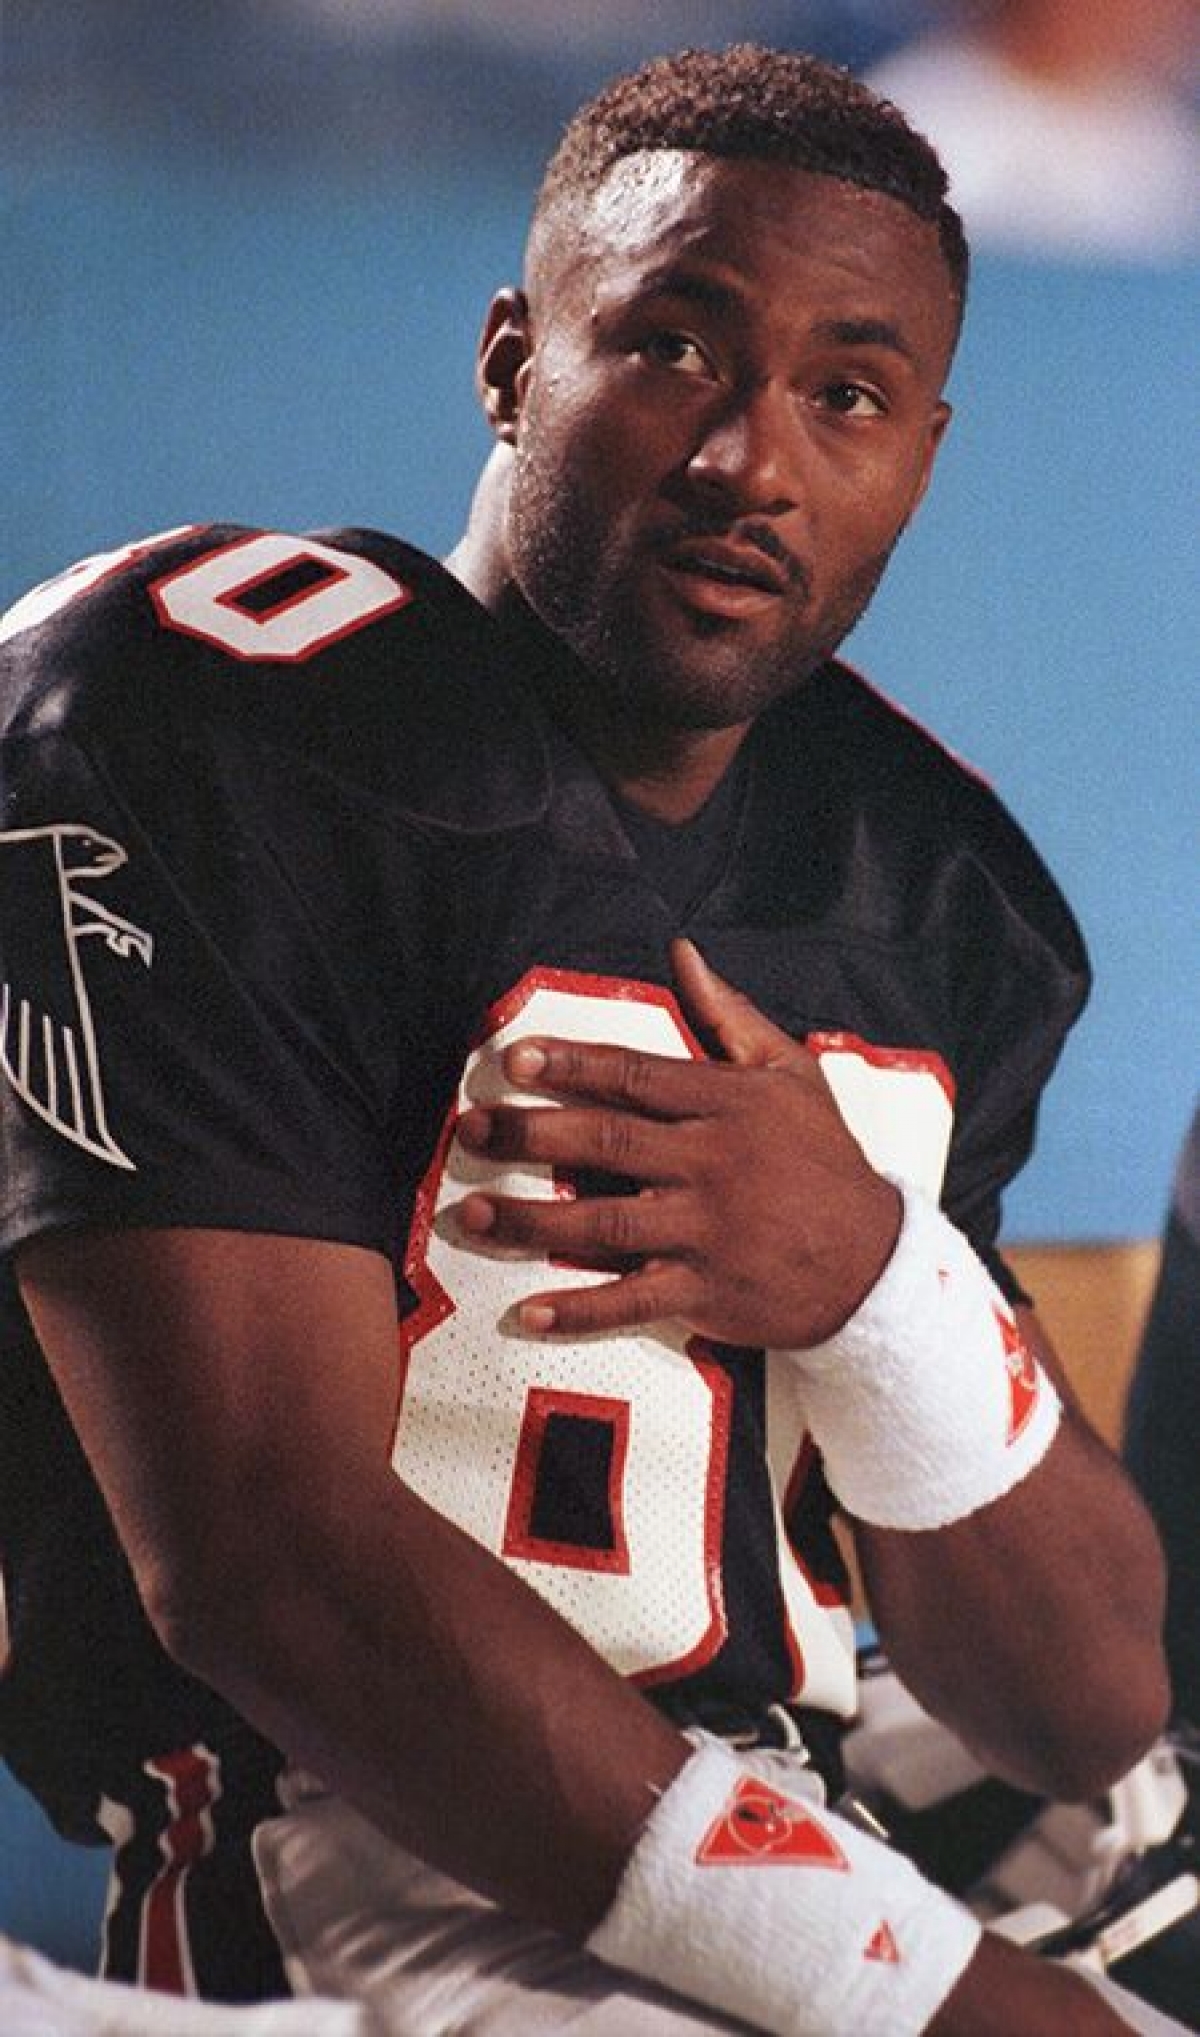 Not in Hall of Fame - 195. Andre Rison